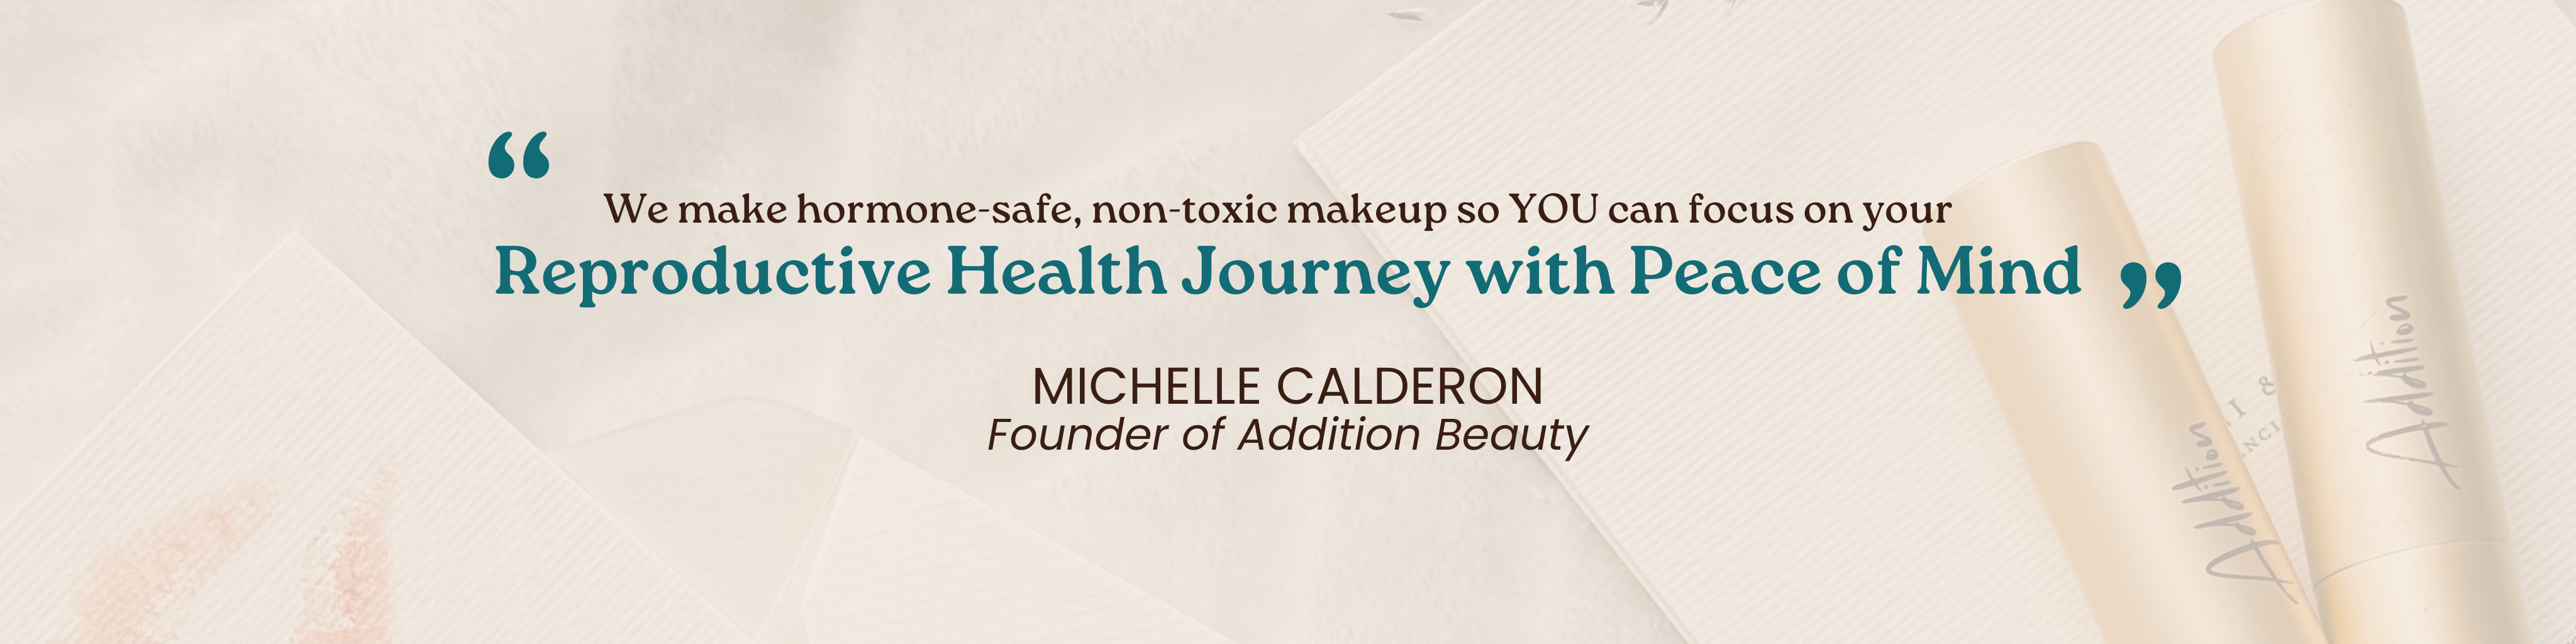 we make hormone-safe, non-toxic makeup so YOU can focus on your reproductive health journey with peace of mind